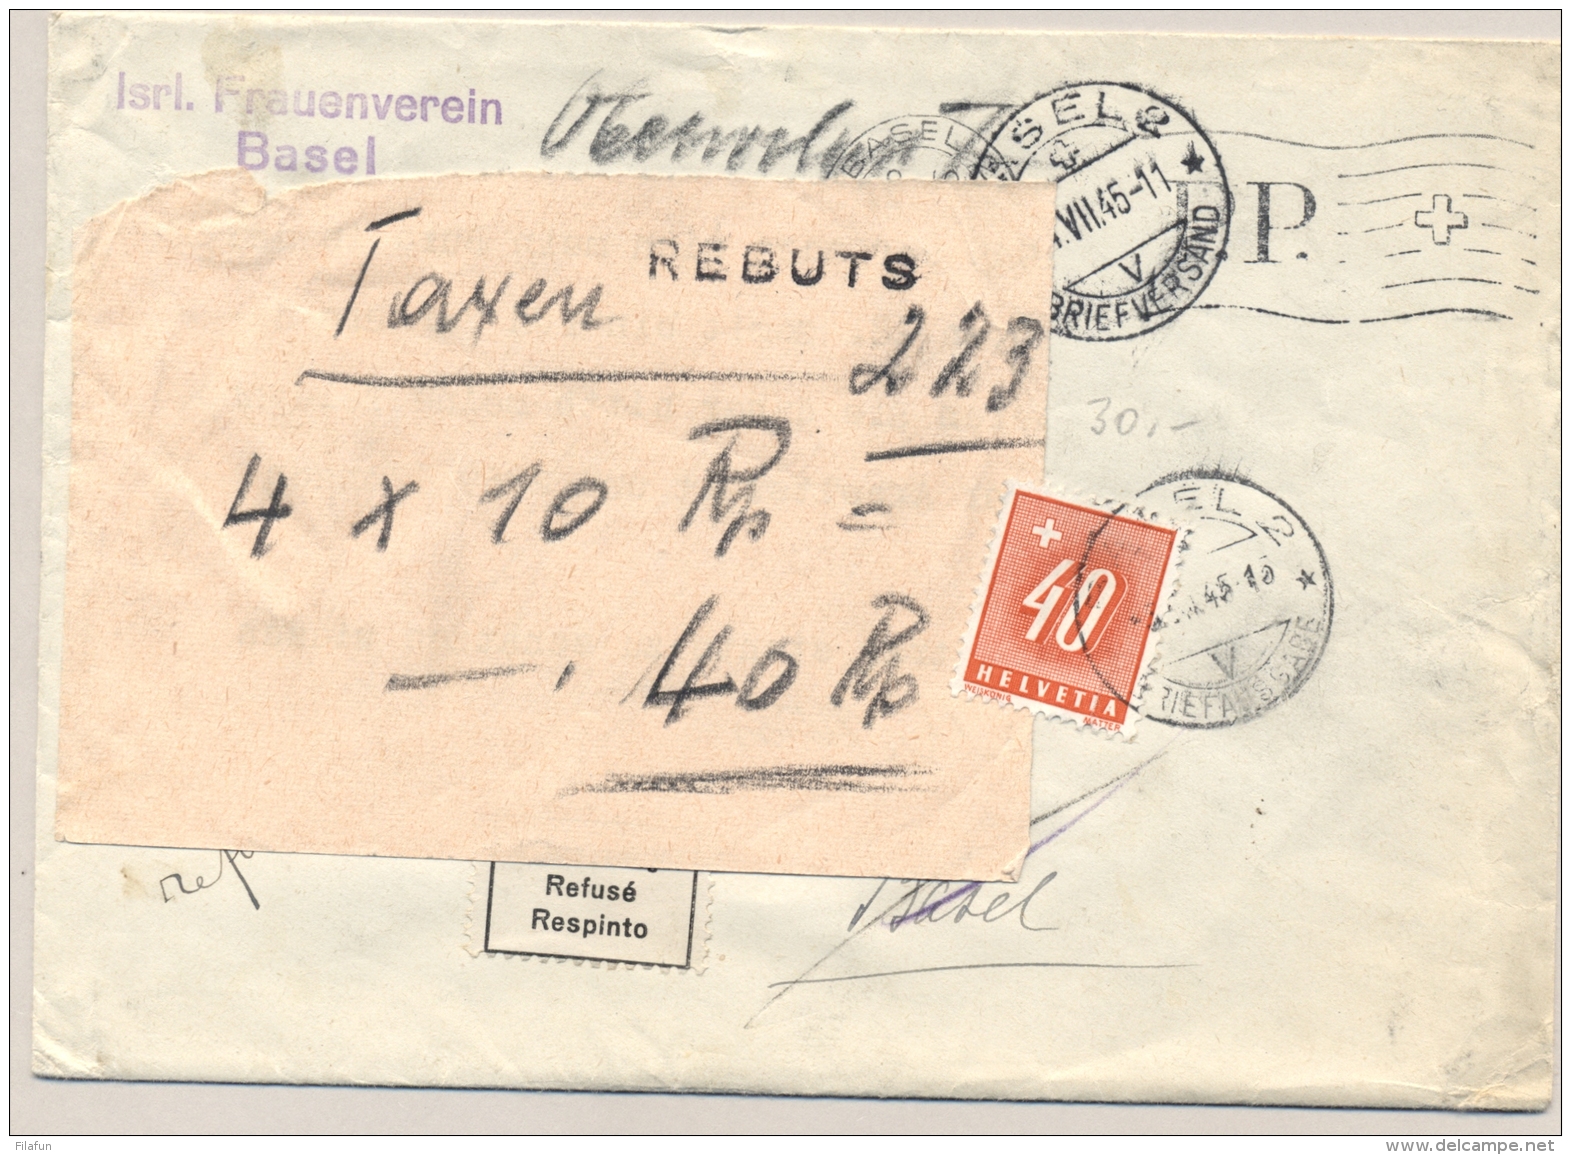 Schweiz - 1945 - 40 Rp Taxed And Rejected PP-cover Basel Isrl. Frauenverein - Postage Due